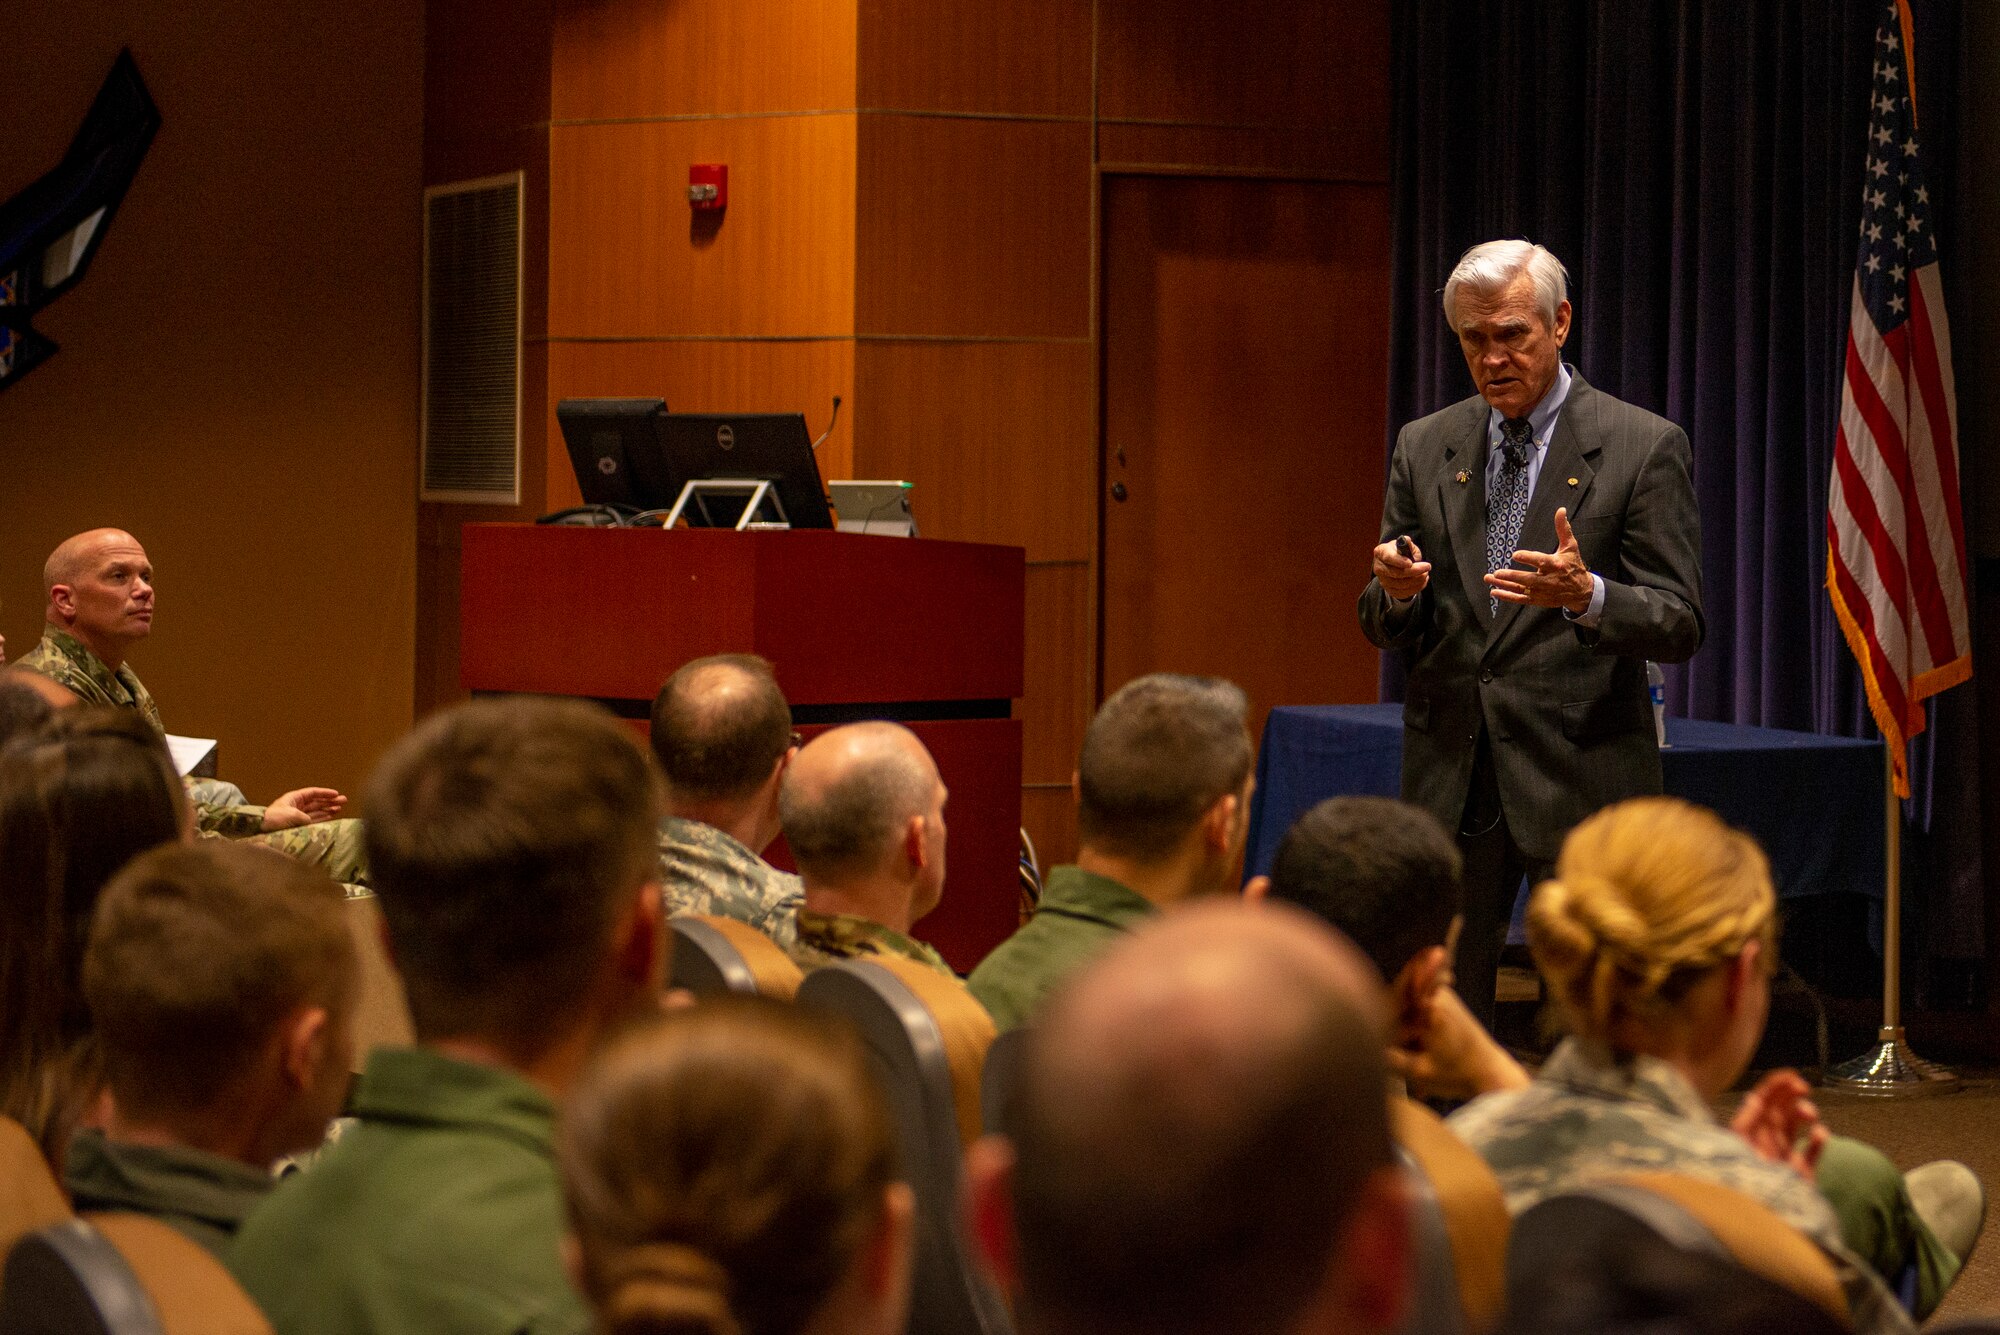 Vietnam Prisoner of War, retired Air Force Lt. Col. Barry Bridger spoke to Team Offutt during the commander’s update briefing May 16, 2019, at Offutt Air Force Base, Nebraska. After spending 2,232 days in captivity in the Hoa Loa  prisoner camp, Bridger was released during Operation Homecoming March 4, 1973.